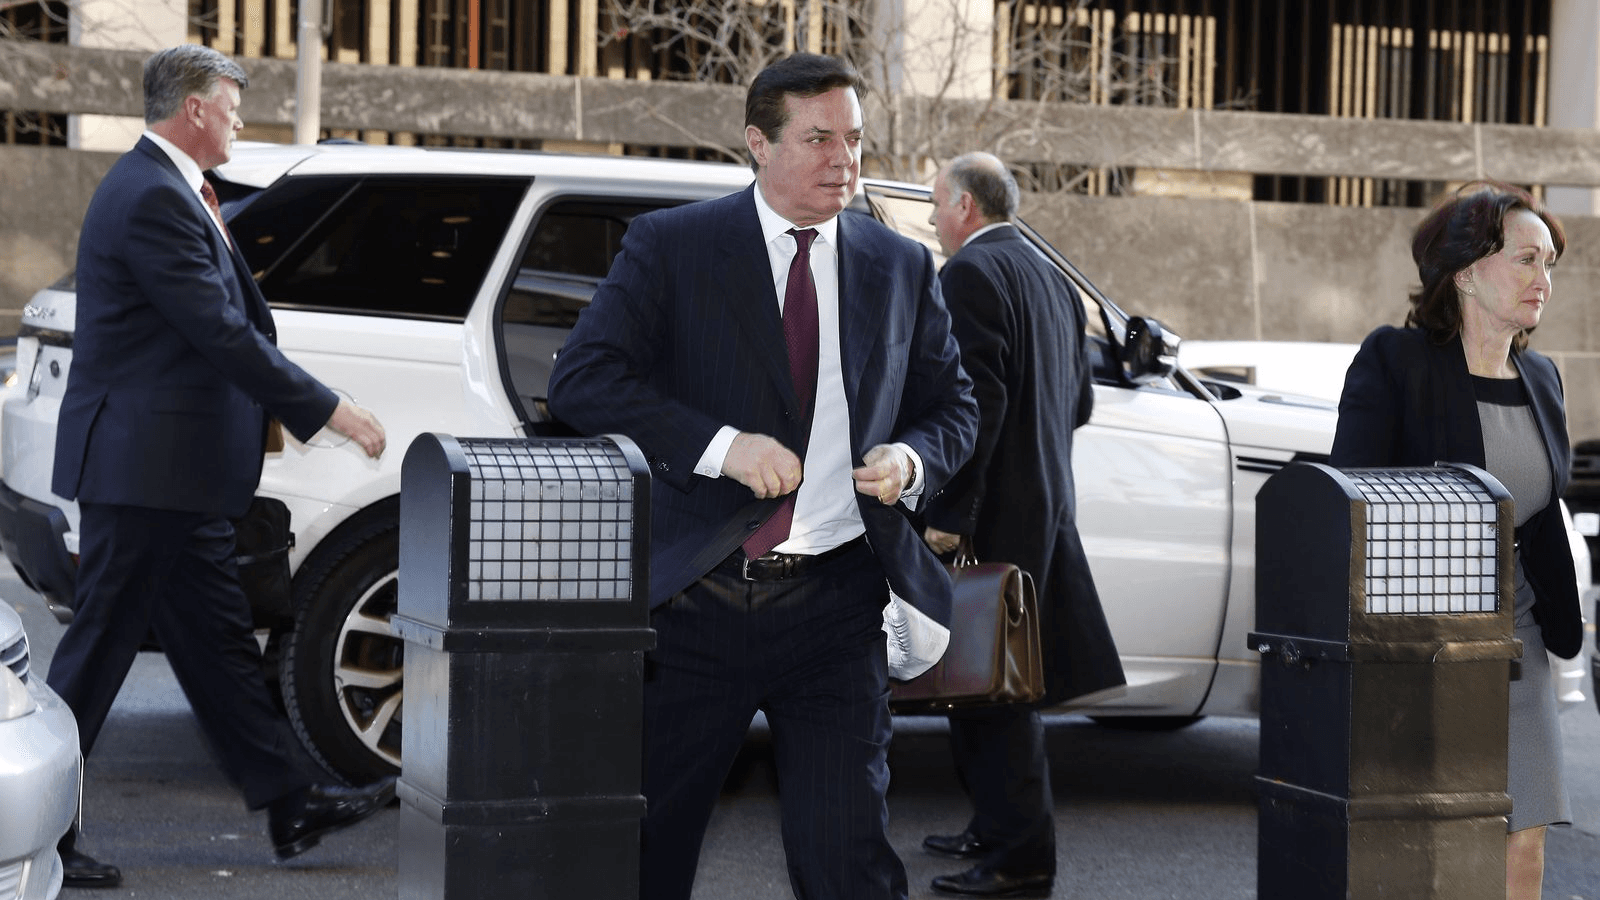 Paul Manafort, former campaign chairman for President Donald Trump, arrives for a bond hearing at US District Court in Washington, Dec. 11, 2017. 